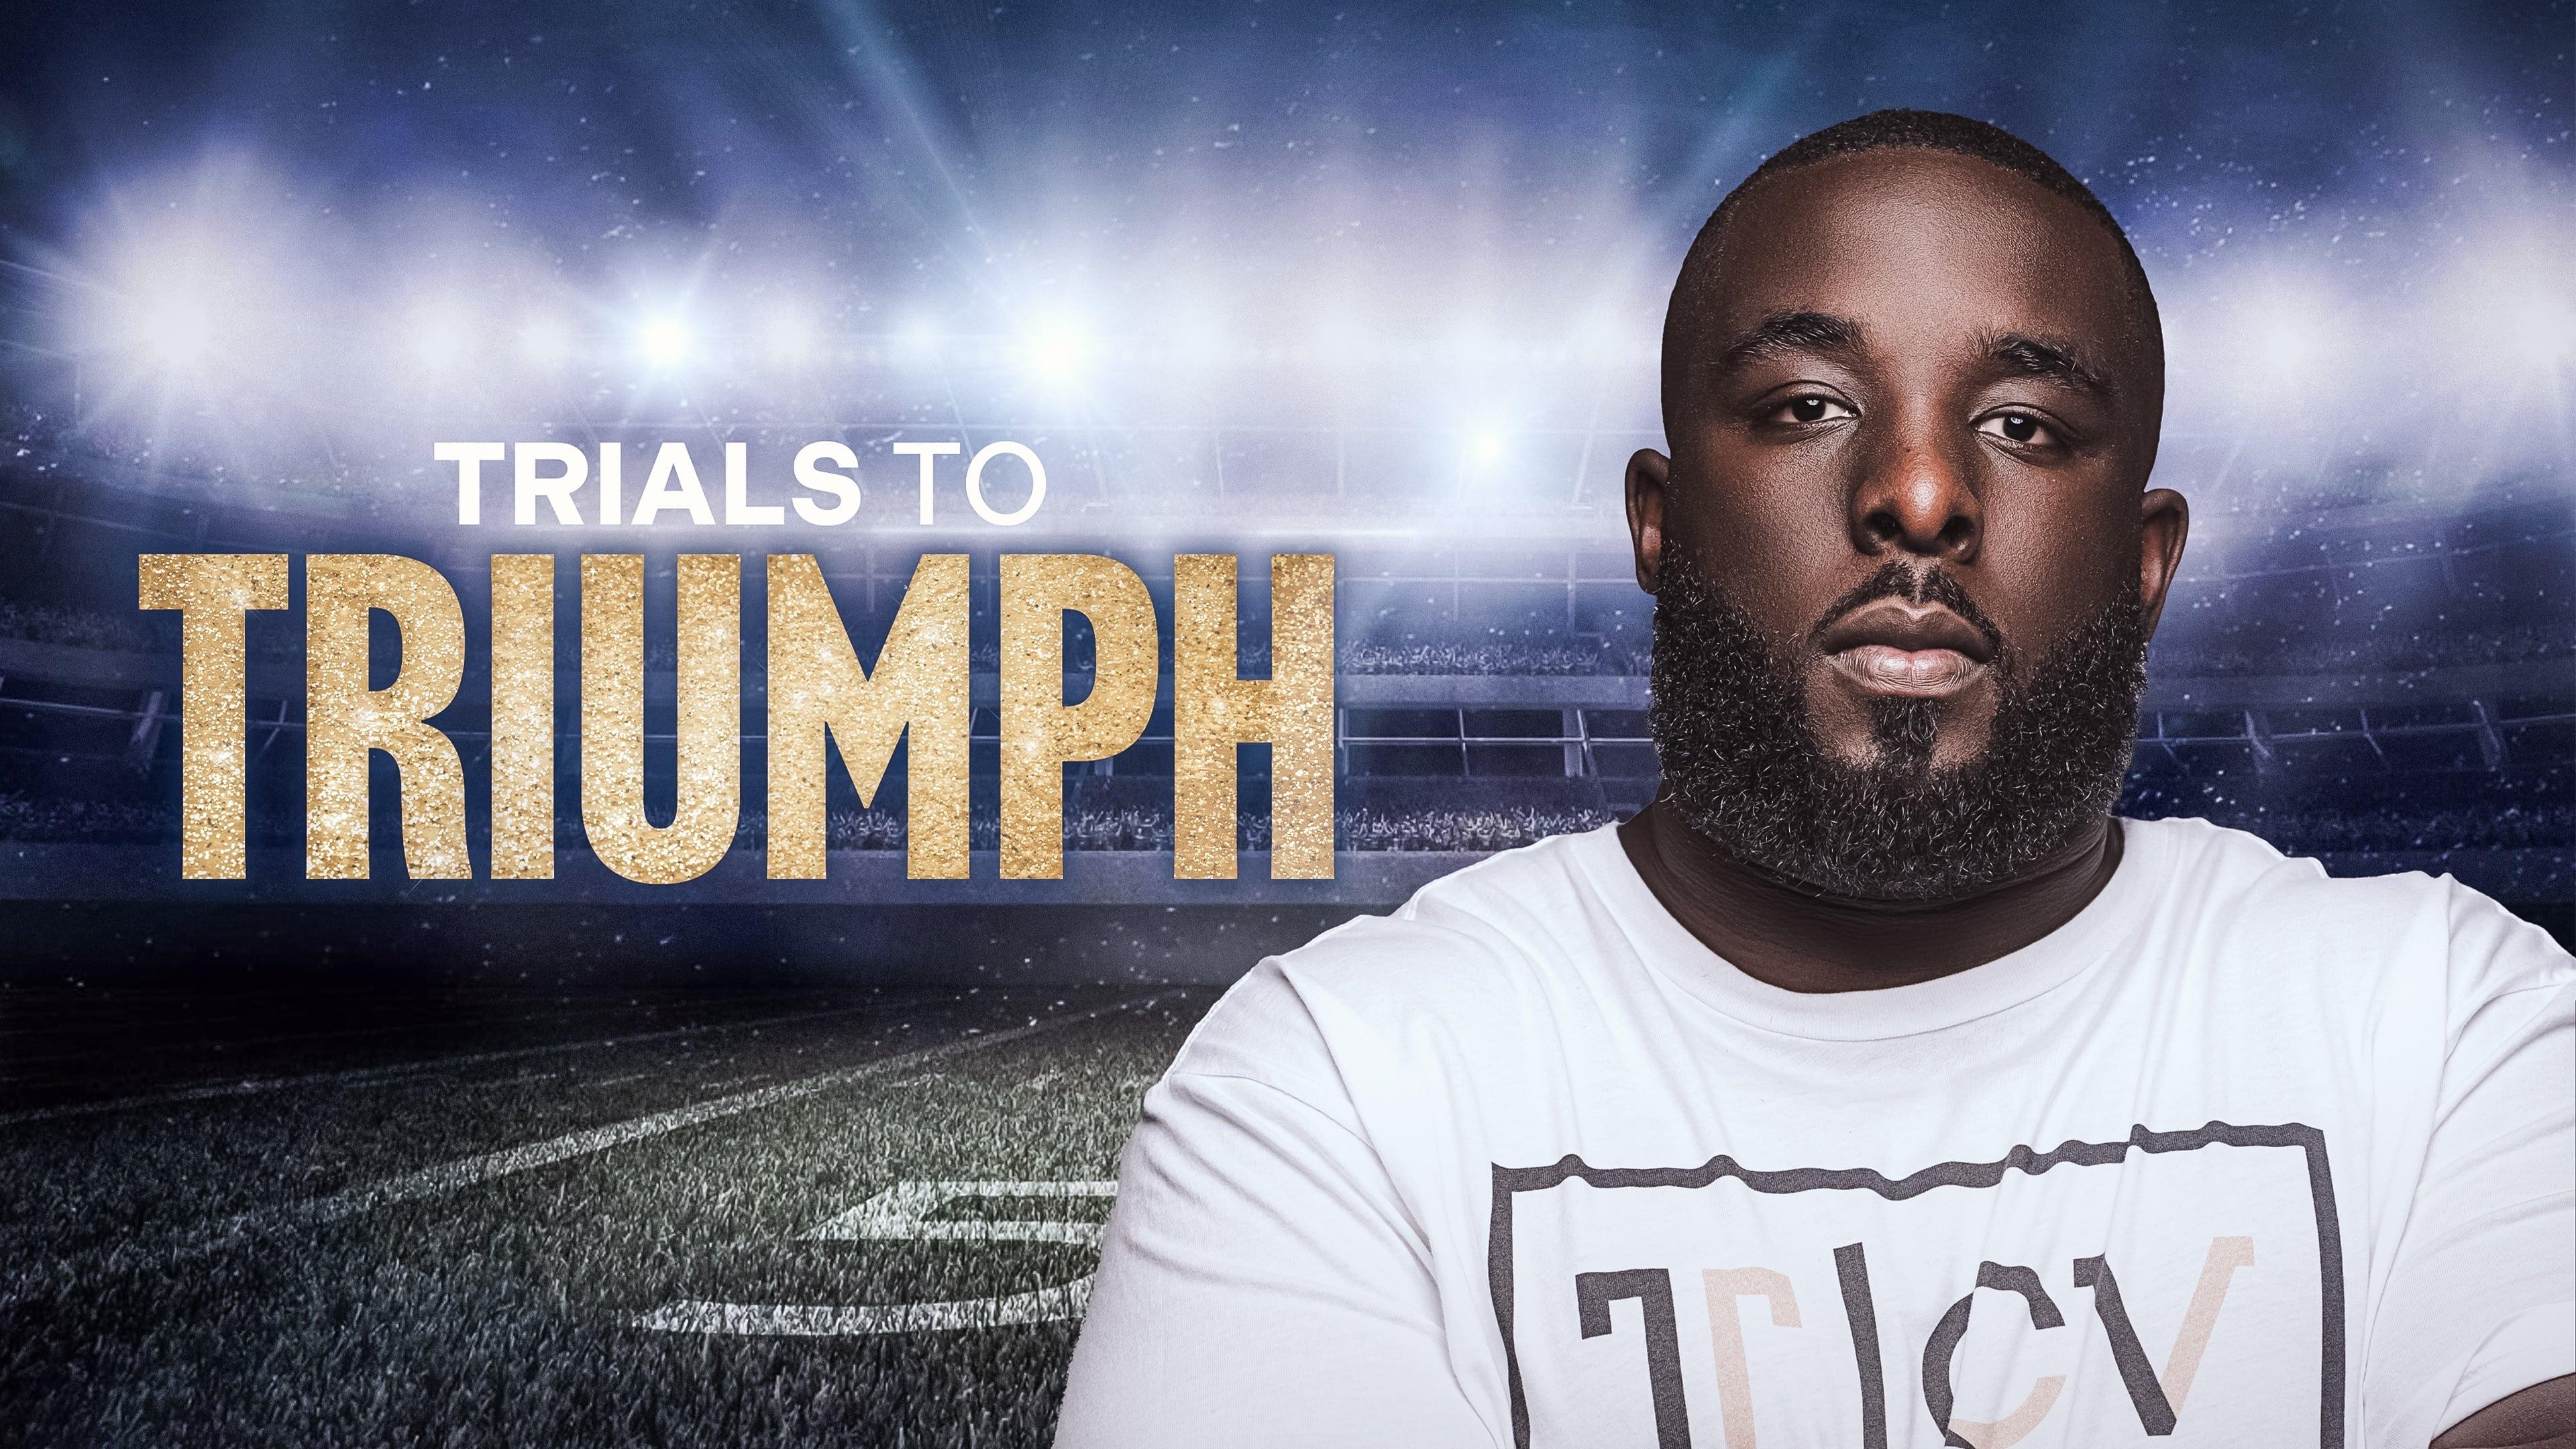 Trials To Triumph: The Documentary backdrop